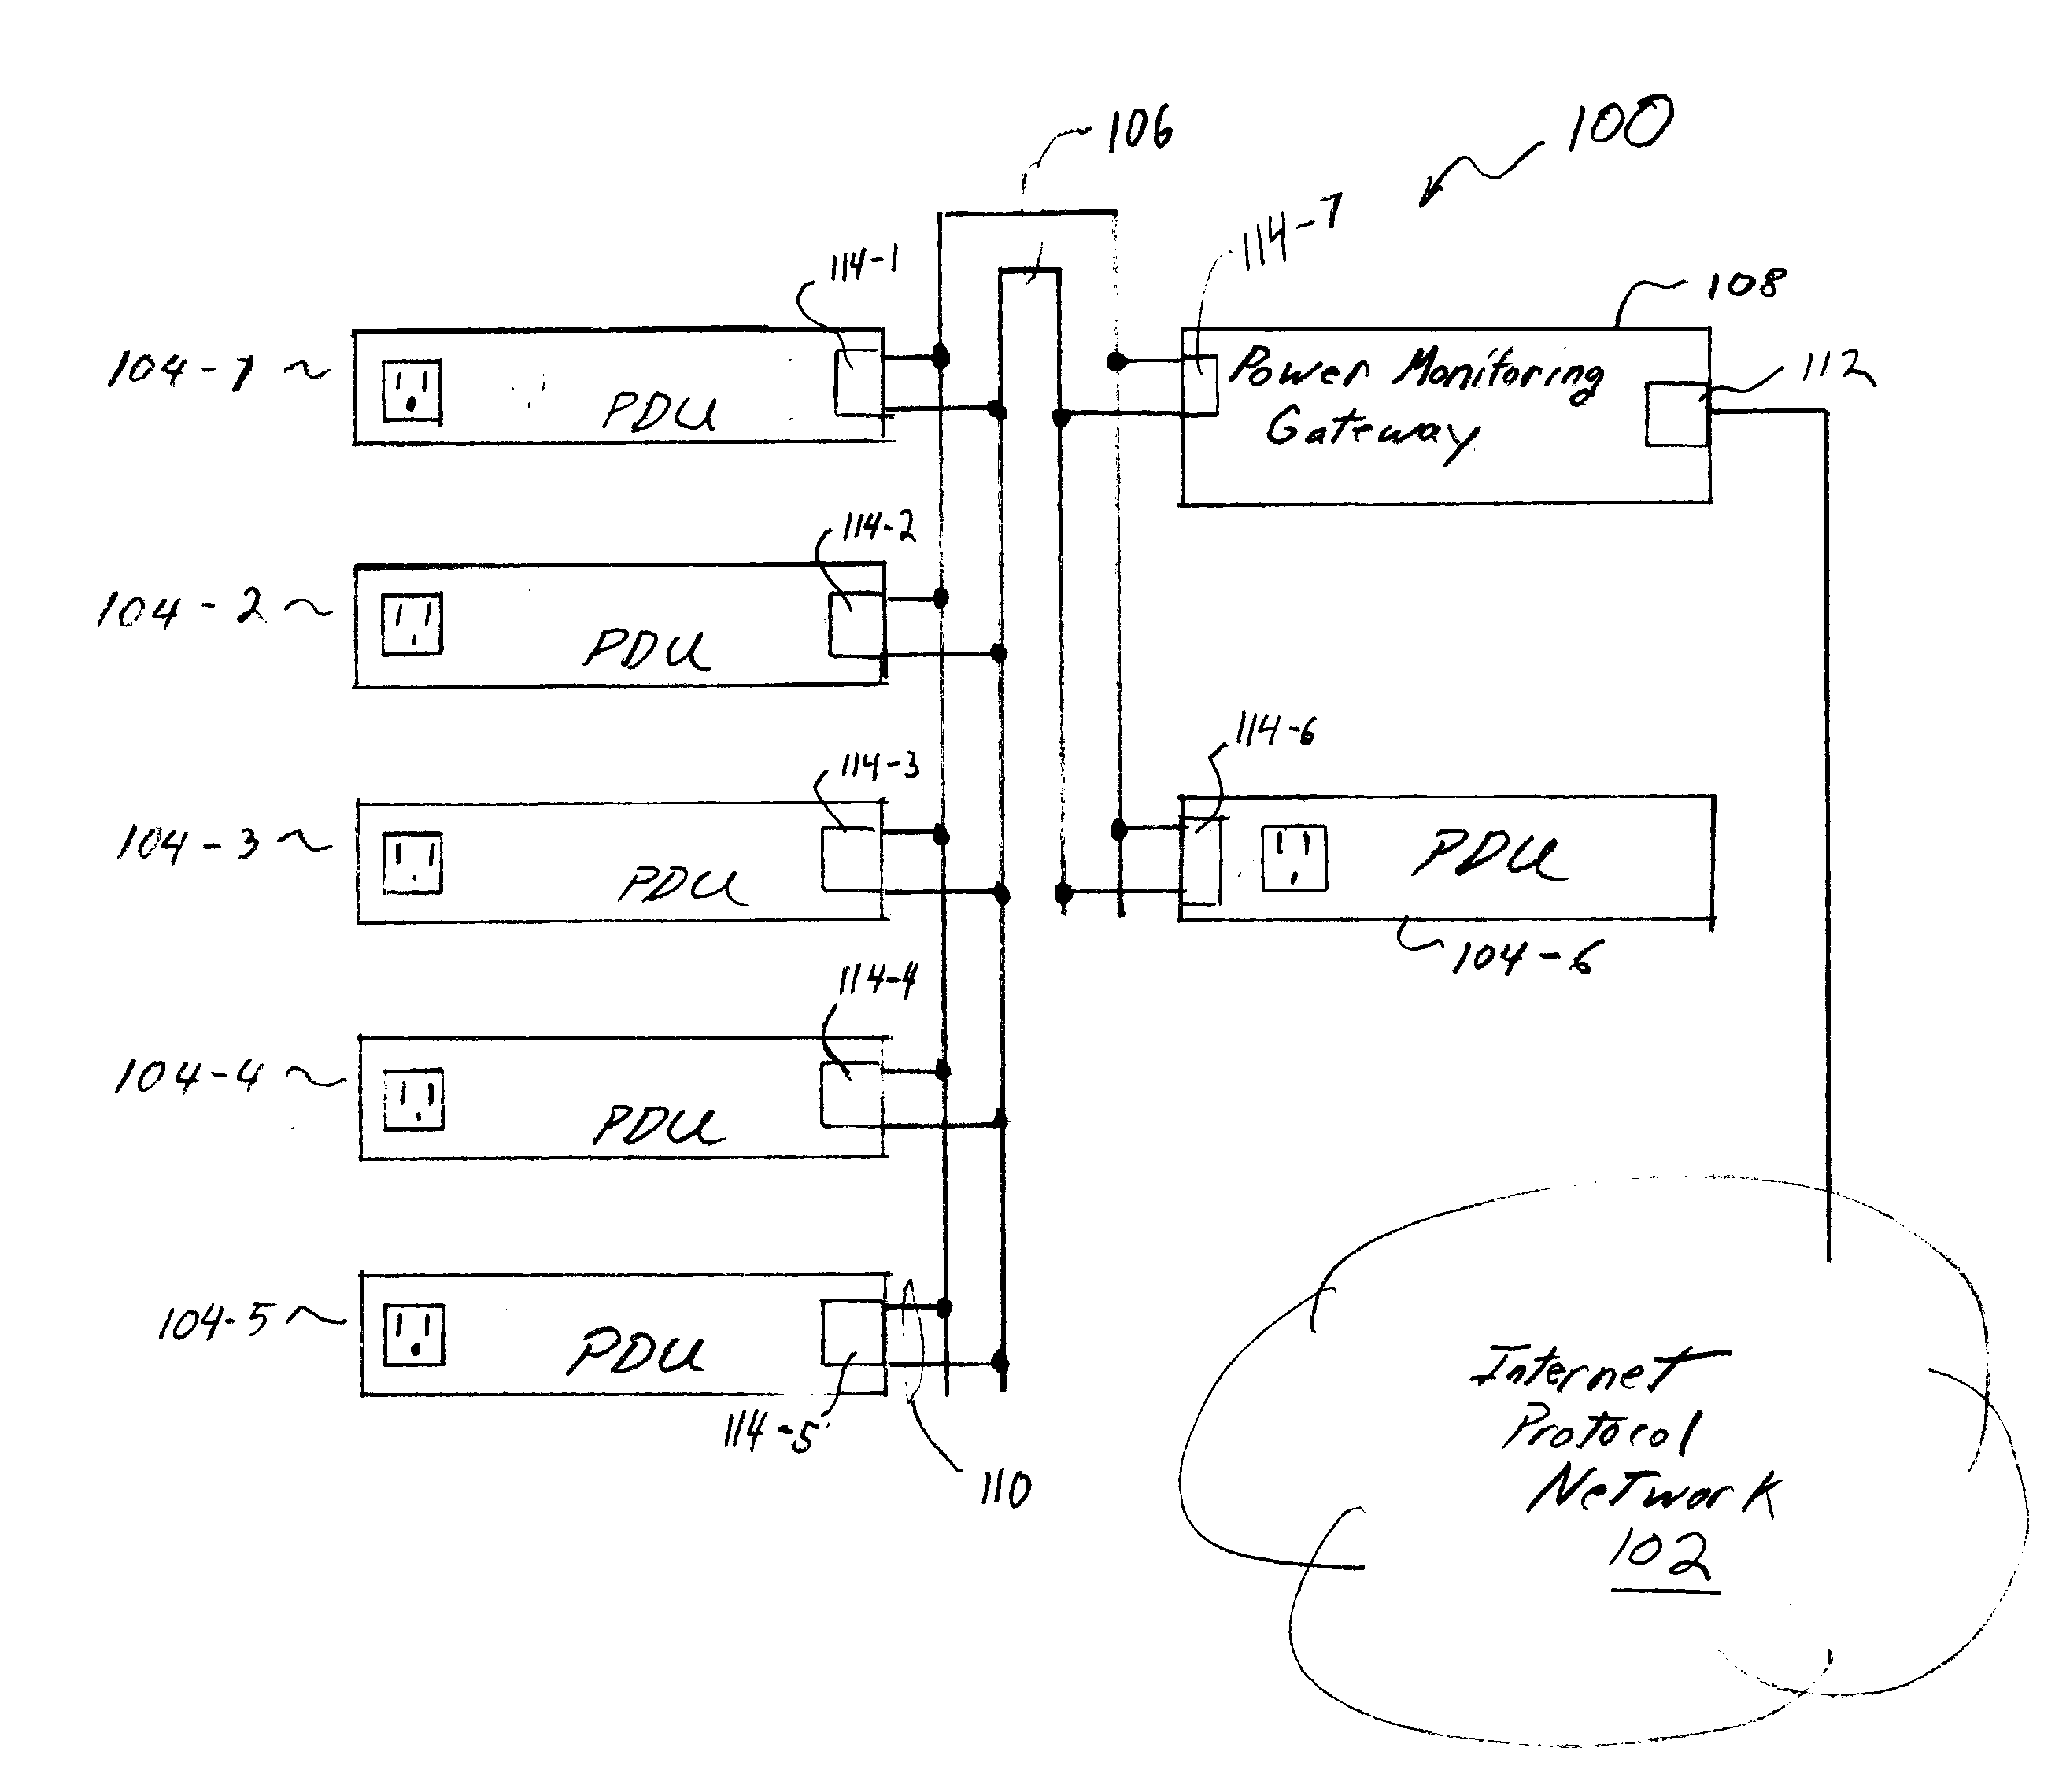 Power distribution unit monitoring network and components